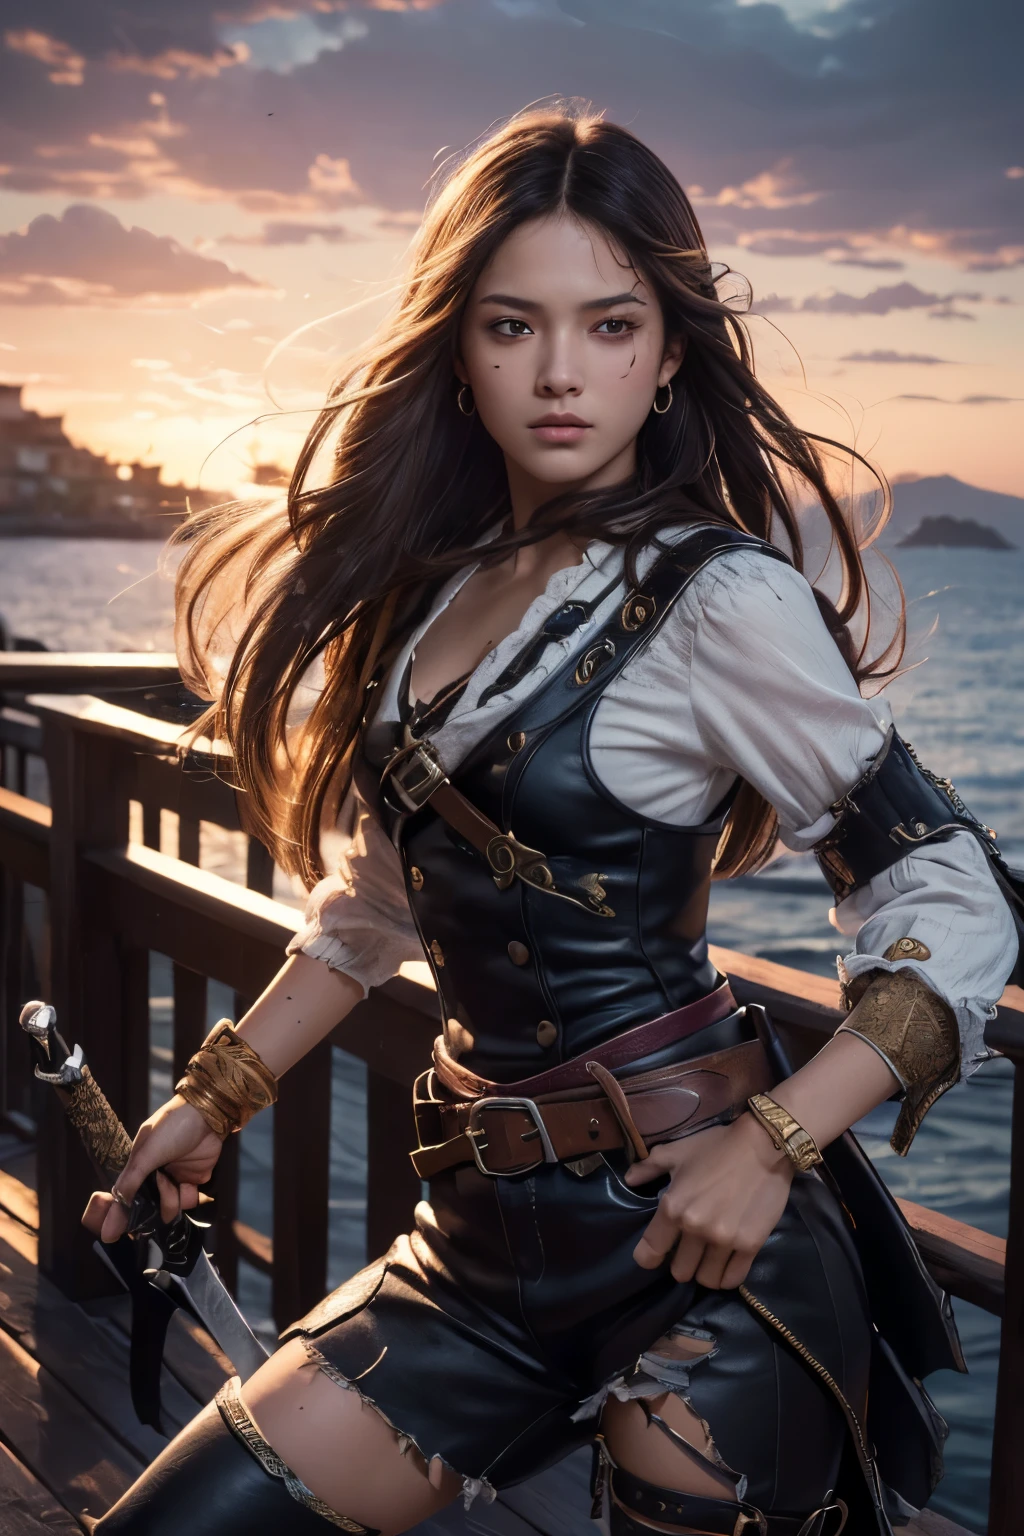 (Ultra quality:1.2), (Ultra detailed:1.2), (Ultra detailed clothes:1.2), (Ultra detailed face:1.2), (Ultra detailed eyes:1.2), (Ultra detailed body:1.2), (Ultra detailed weapons:1.2), young pirate girls, standing on the deck, torn clothes, different hair colors, sword fights, battlefield in the background, fire in the background, night, epic light, dramatic sky